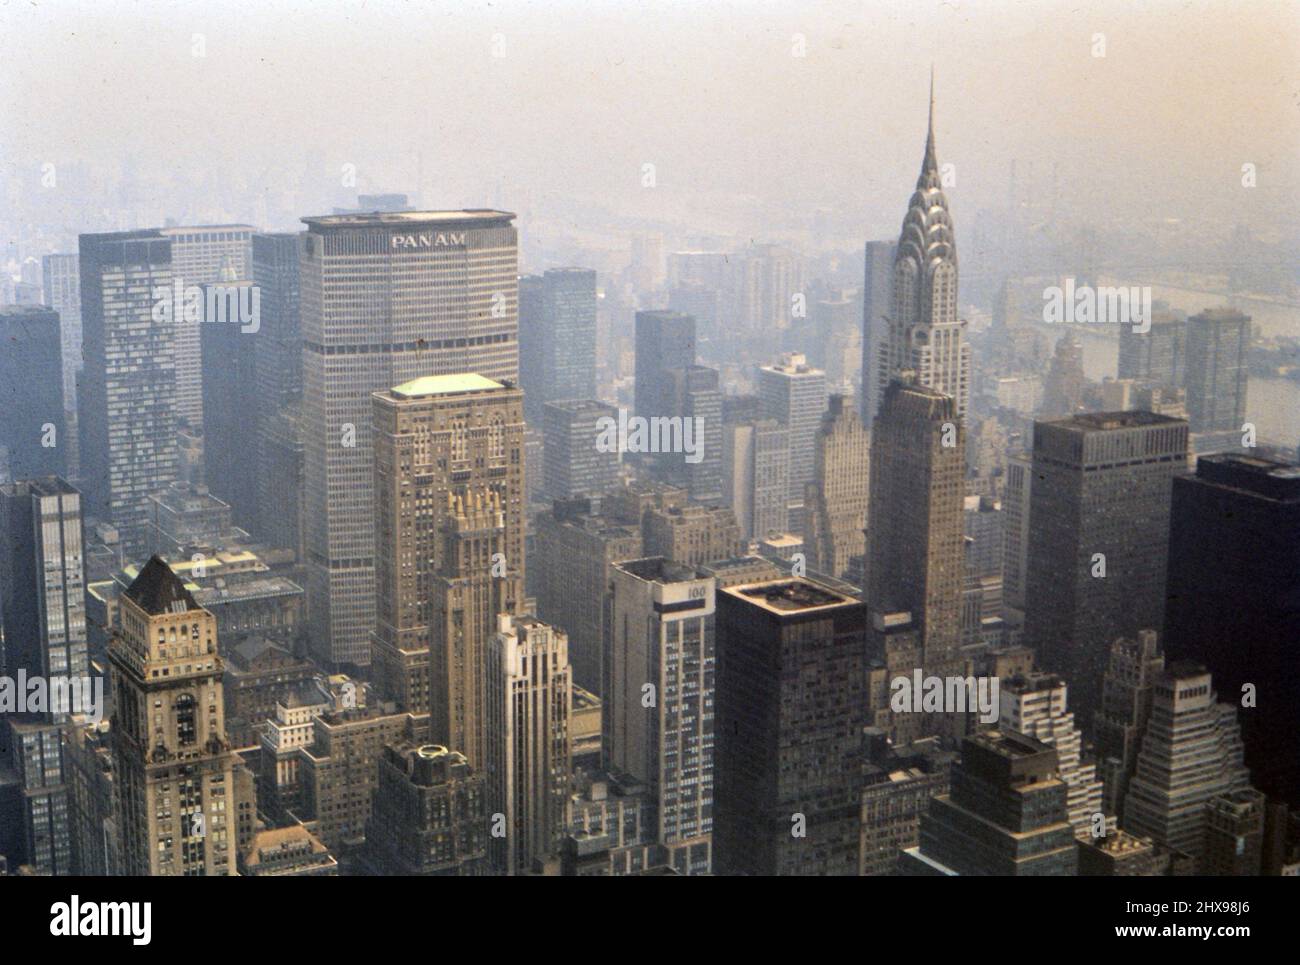 1970s New York City skyline, Pan Am Building to the left of the Chrysler Building ca. 1971-1975 Stock Photo